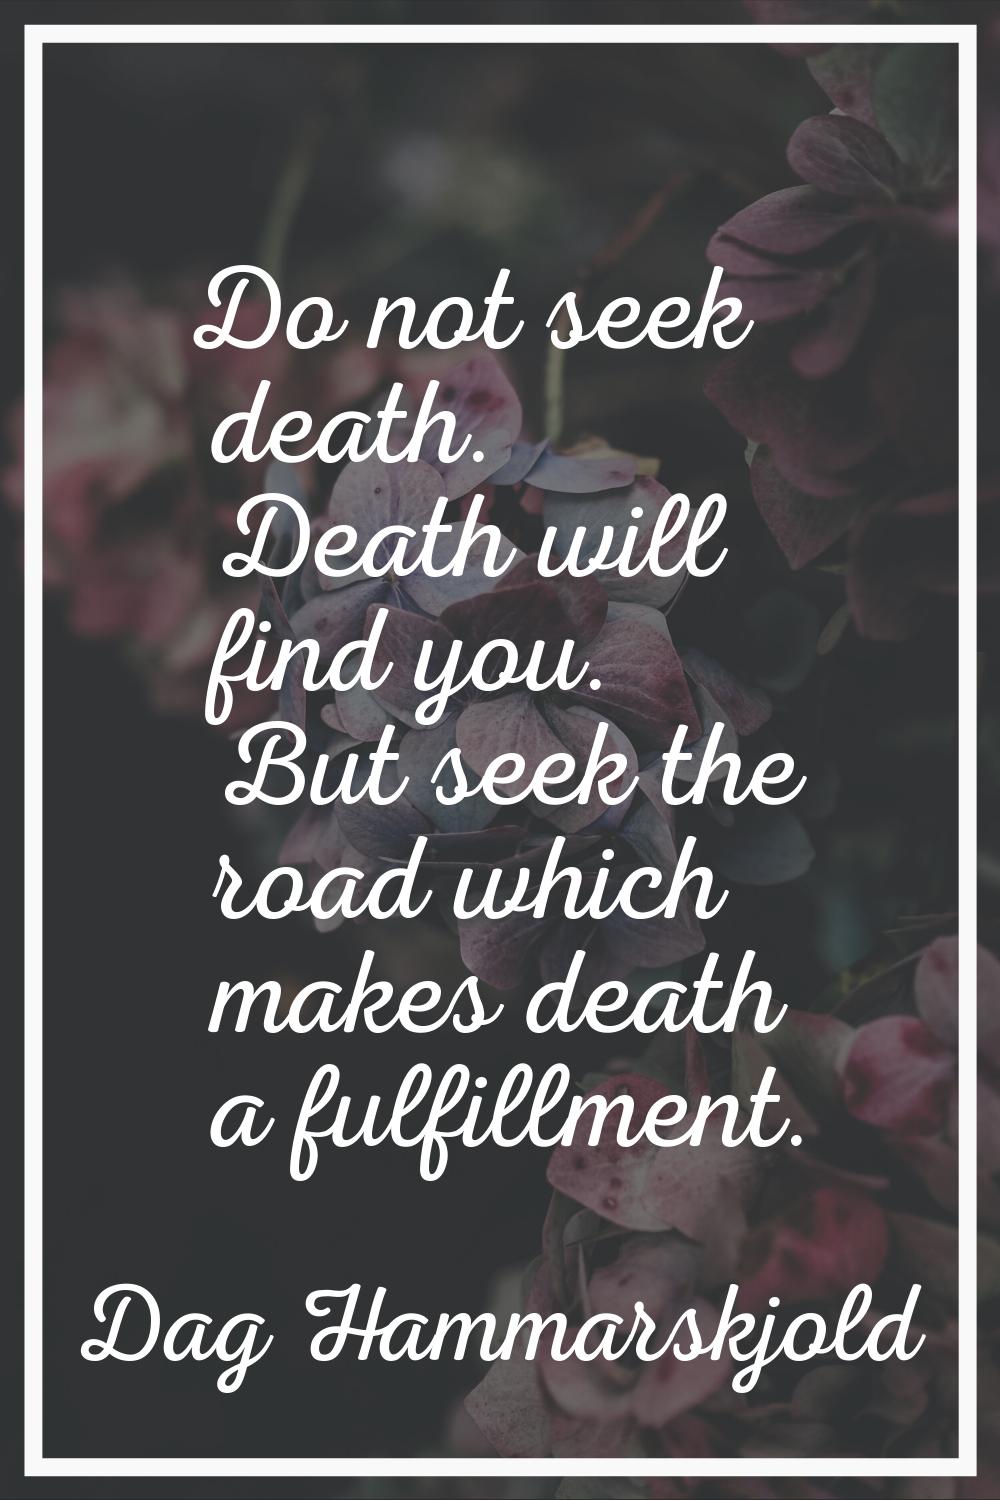 Do not seek death. Death will find you. But seek the road which makes death a fulfillment.